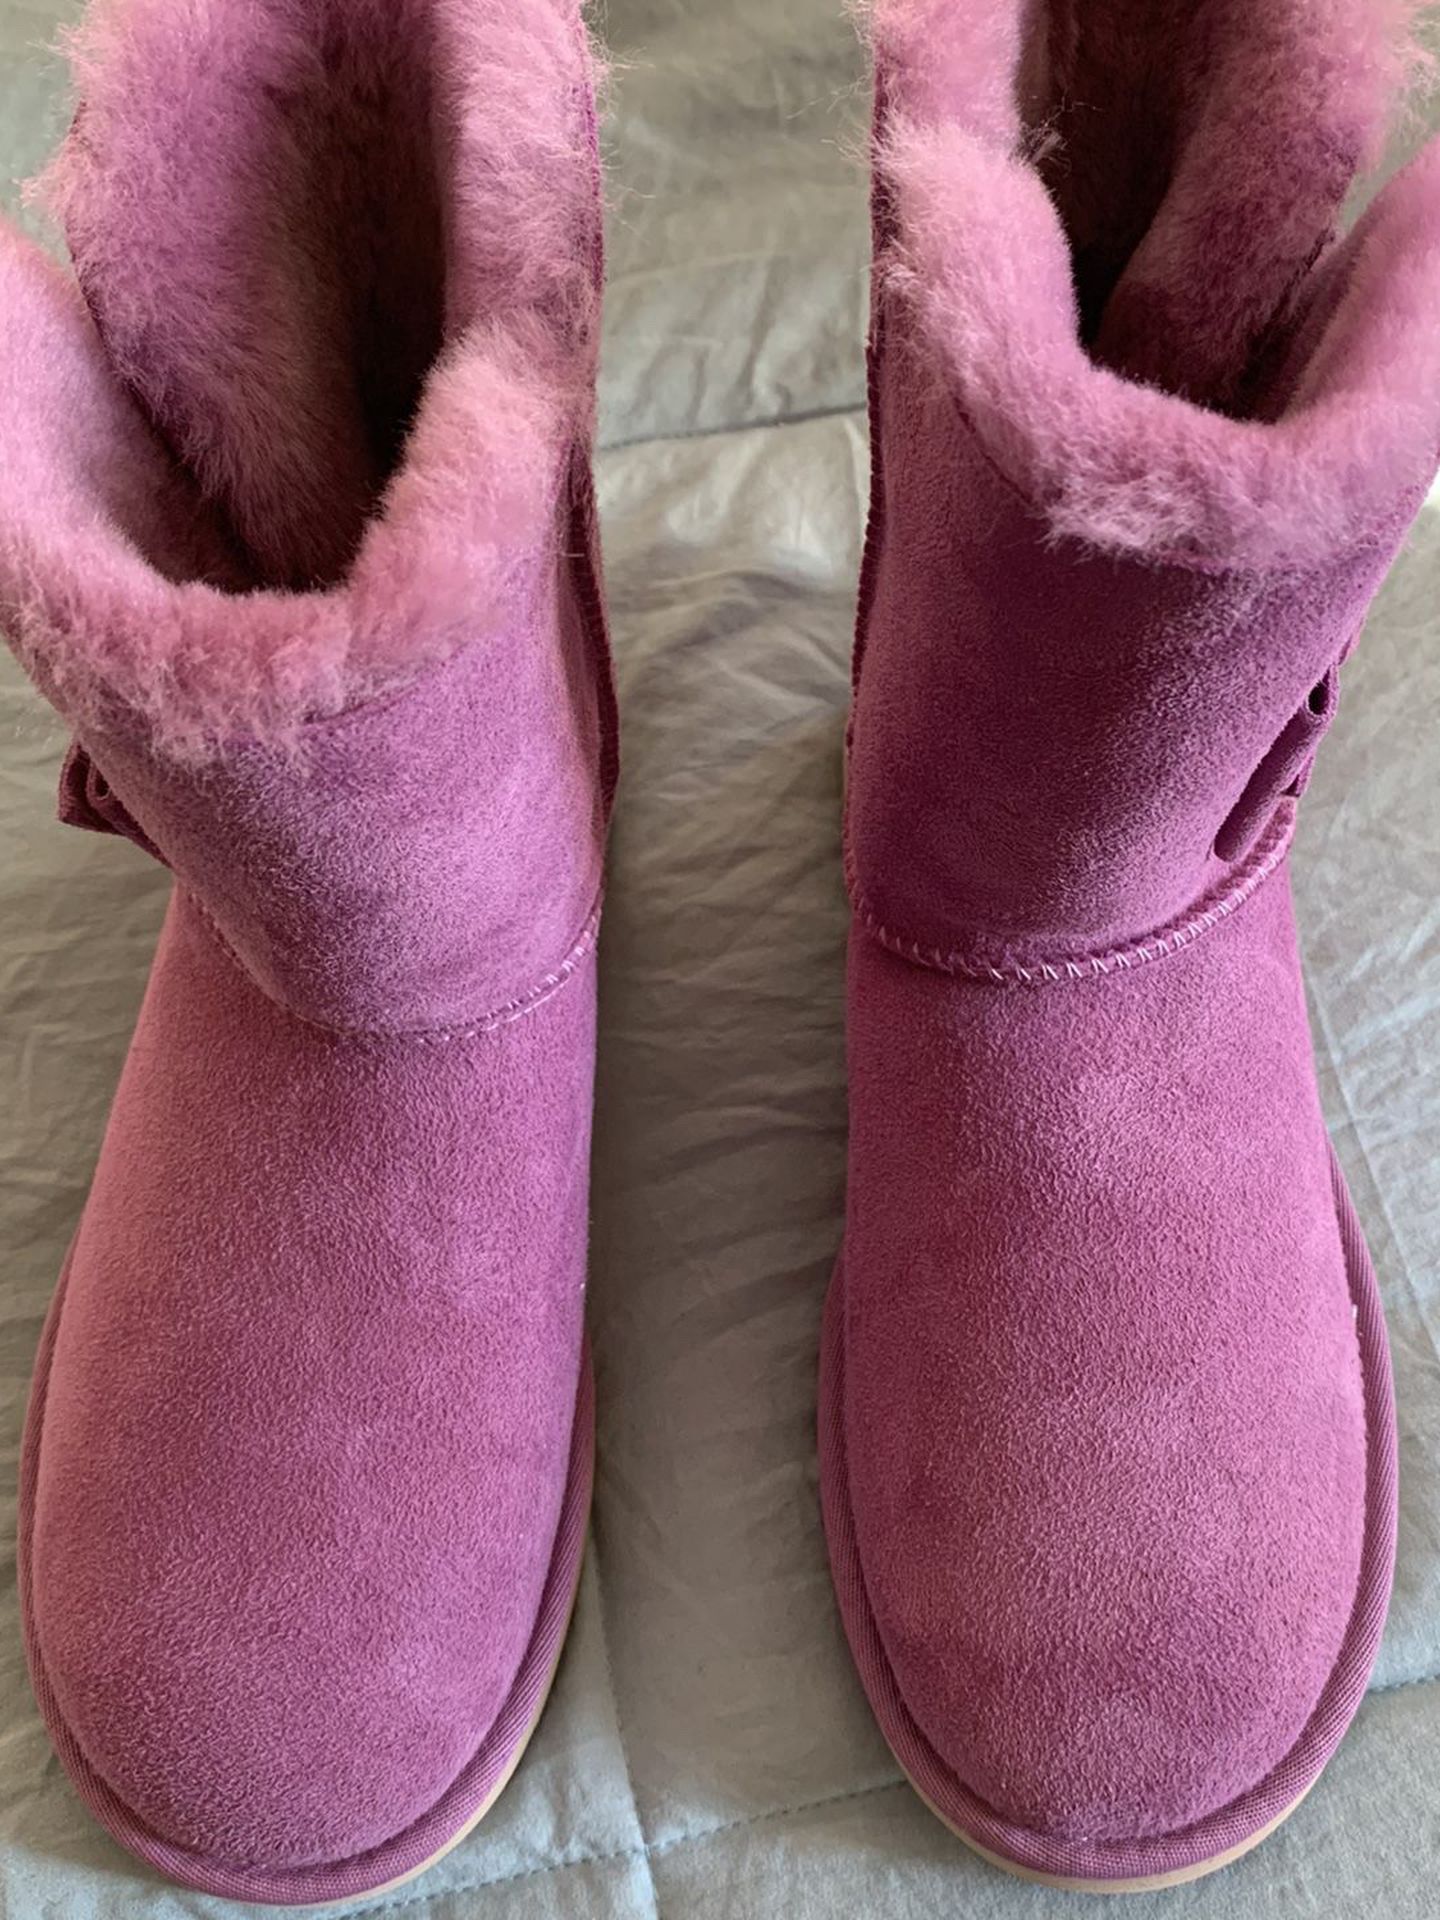 Women’s Size 7 Brand NEW UGG Boots